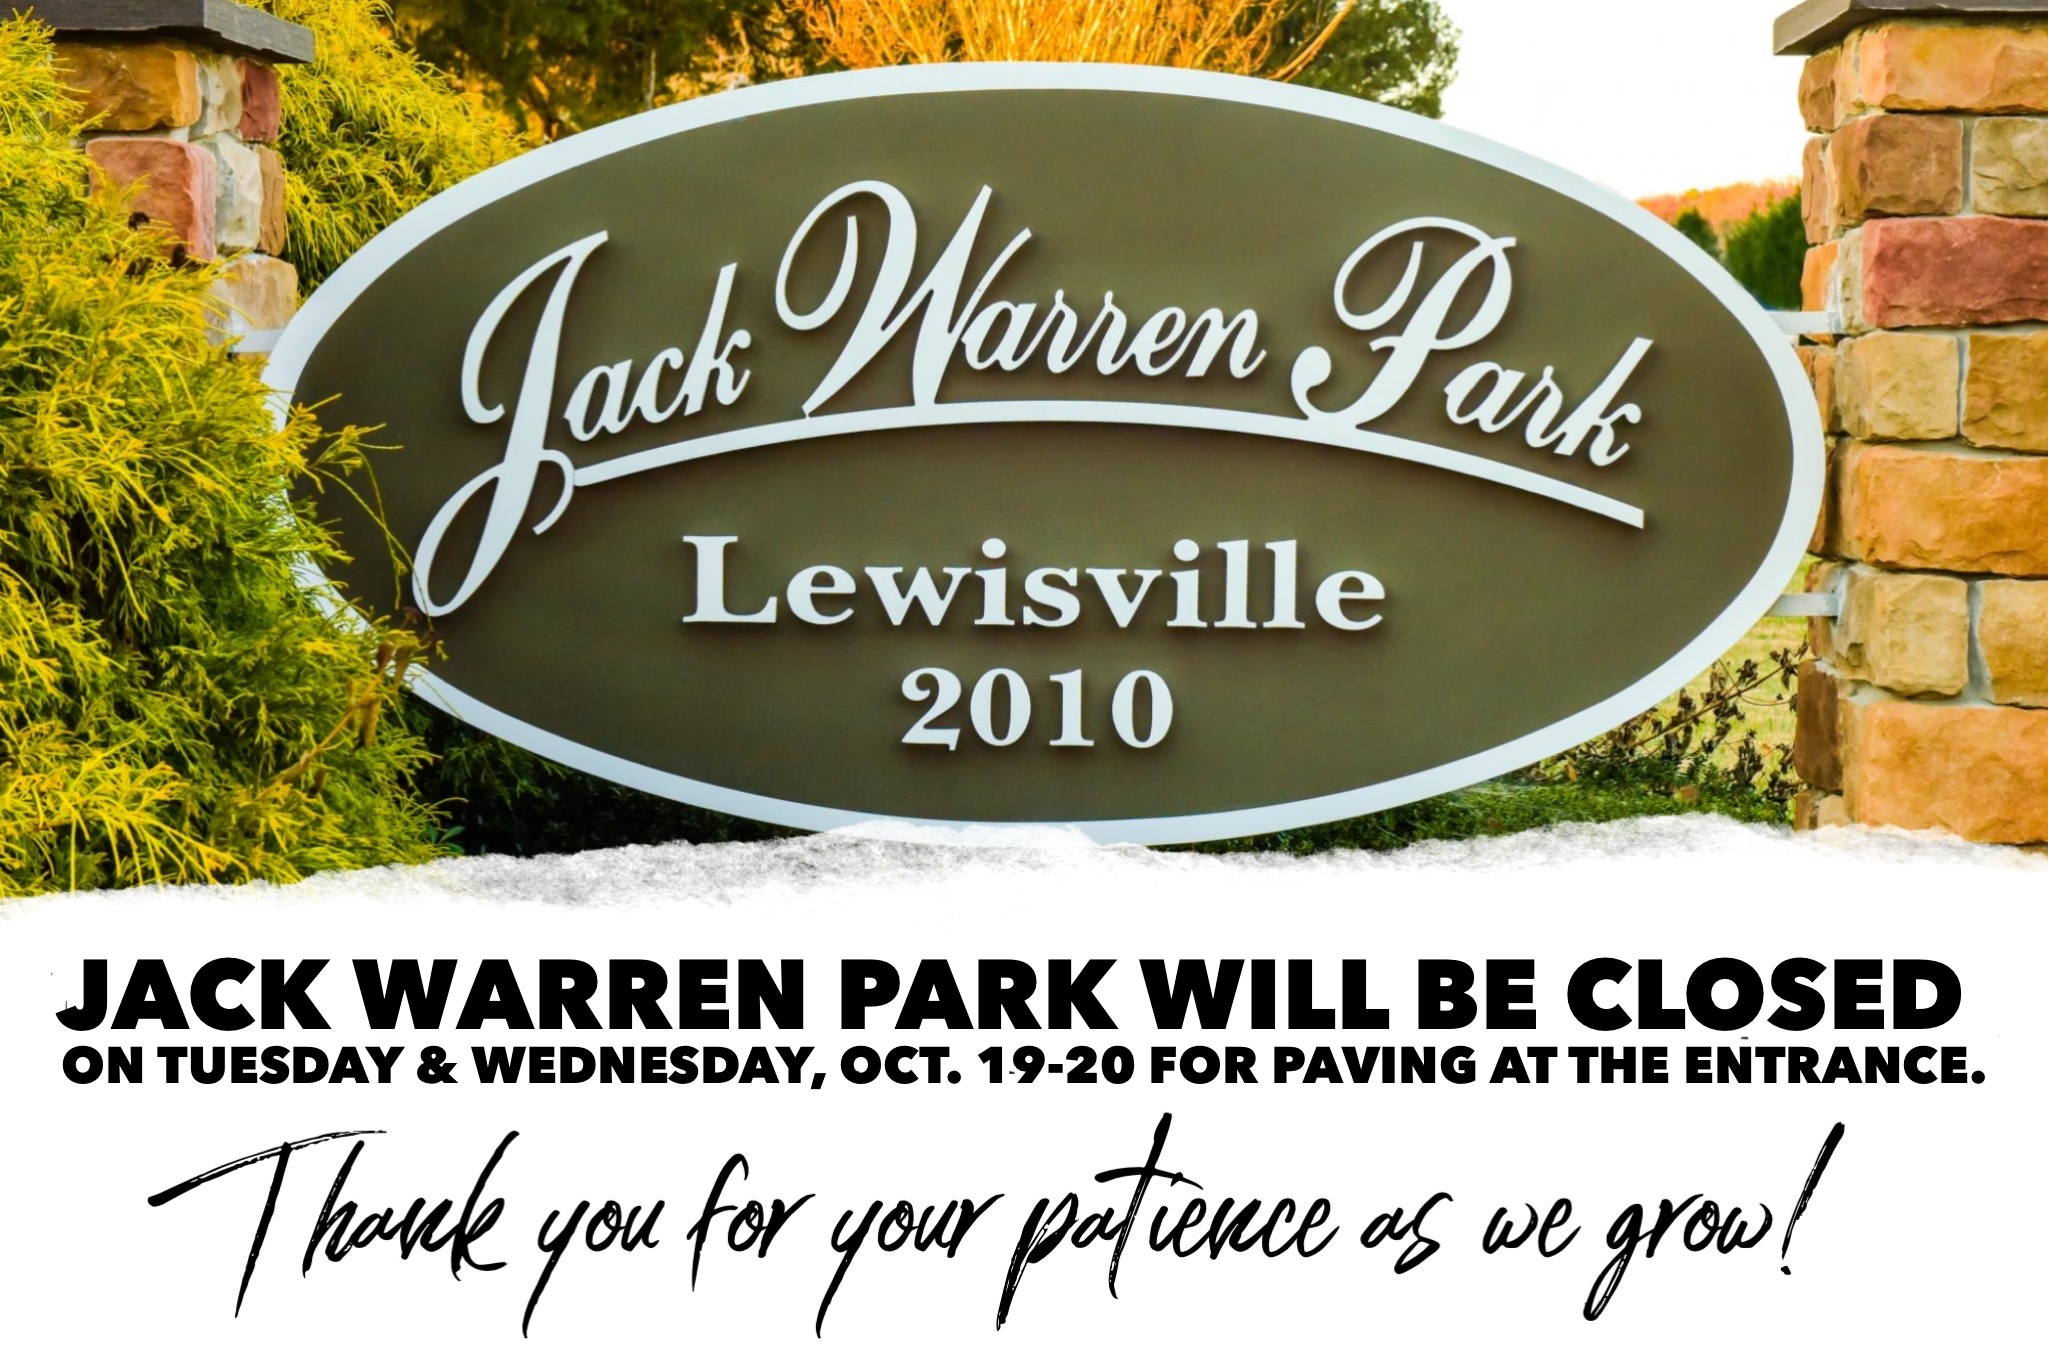 Jack Warren Park will be closed on Tuesday & Wednesday, Oct. 19-20